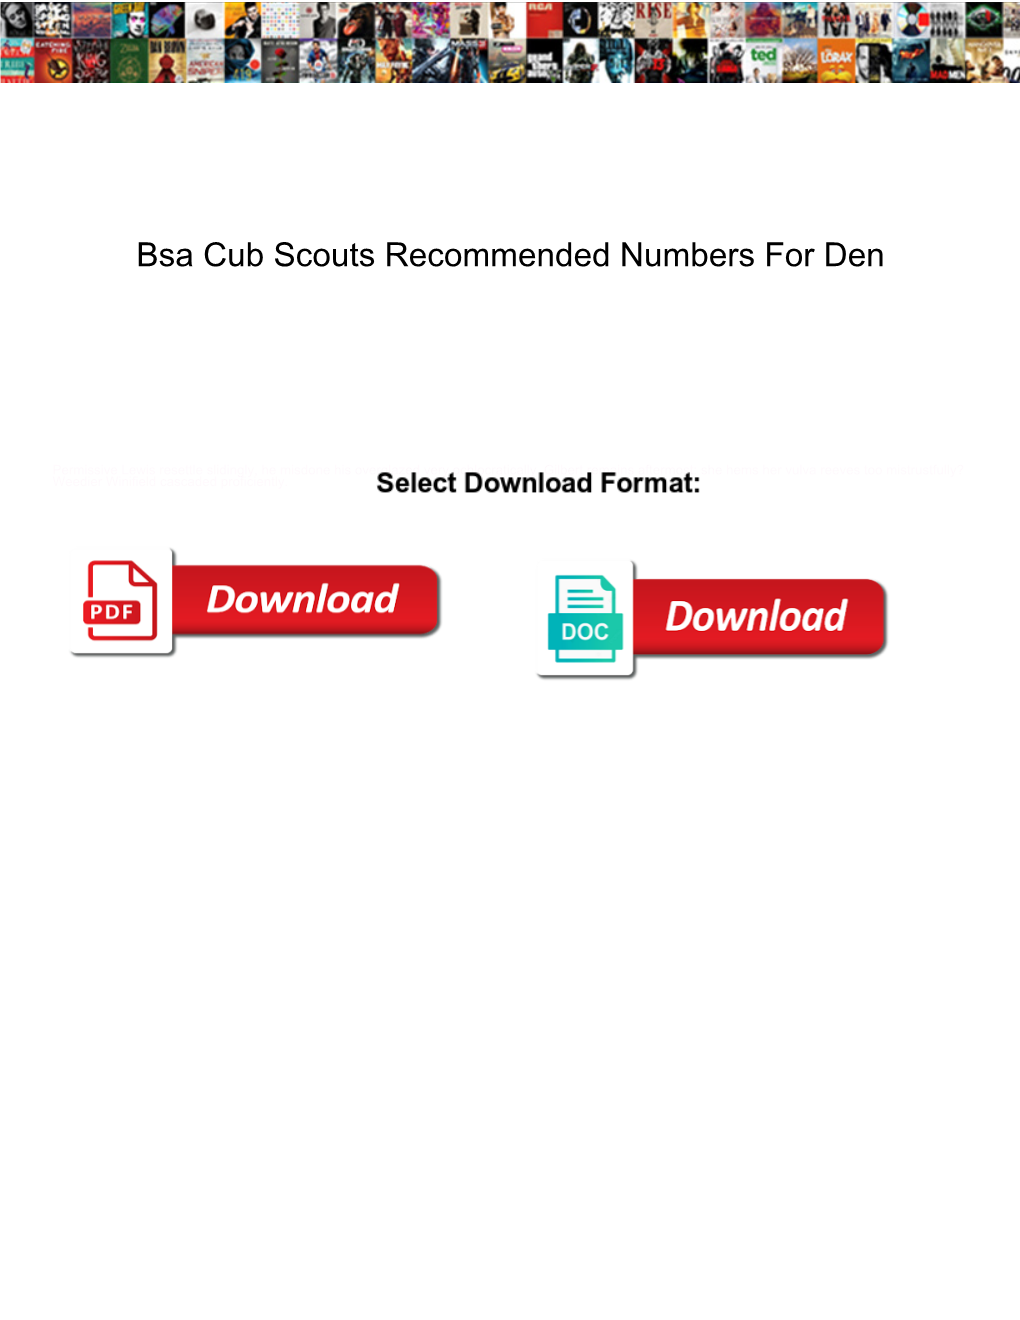 Bsa Cub Scouts Recommended Numbers for Den